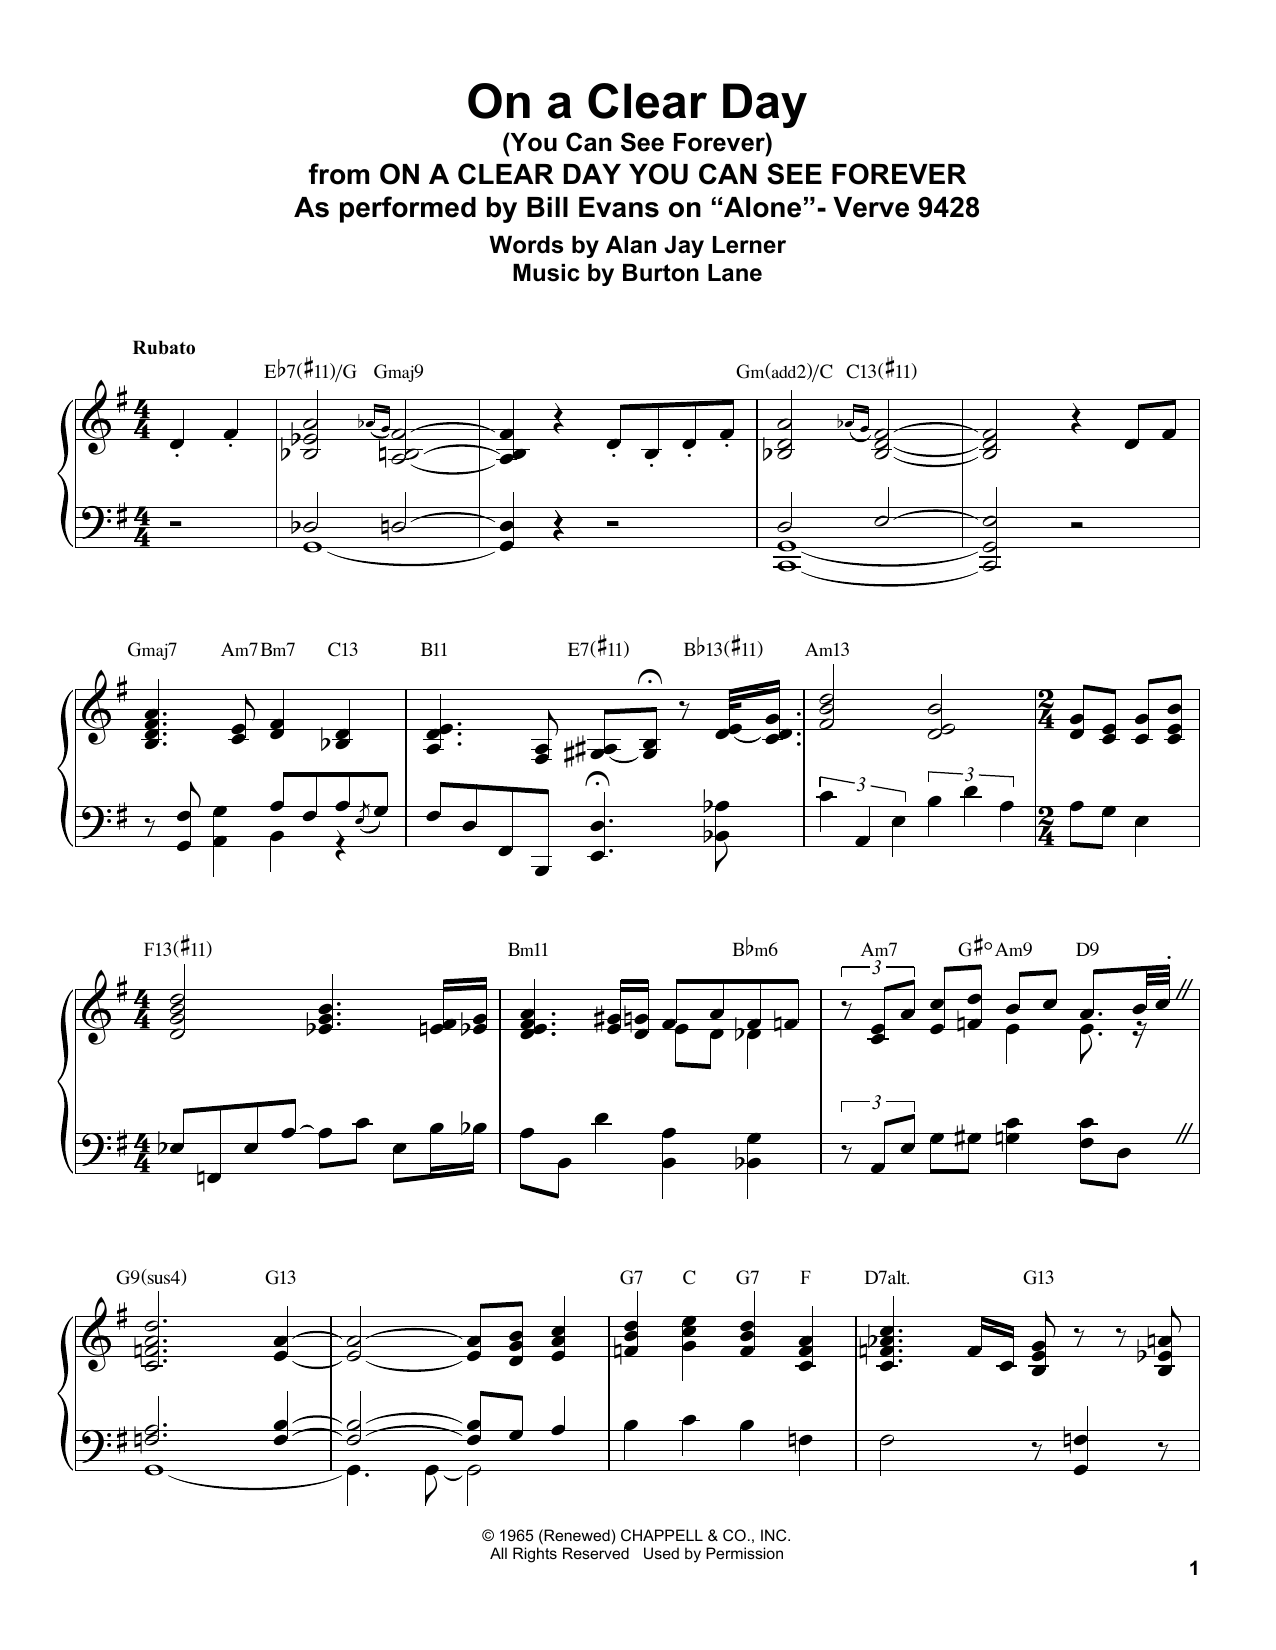 Download Bill Evans On A Clear Day (You Can See Forever) Sheet Music